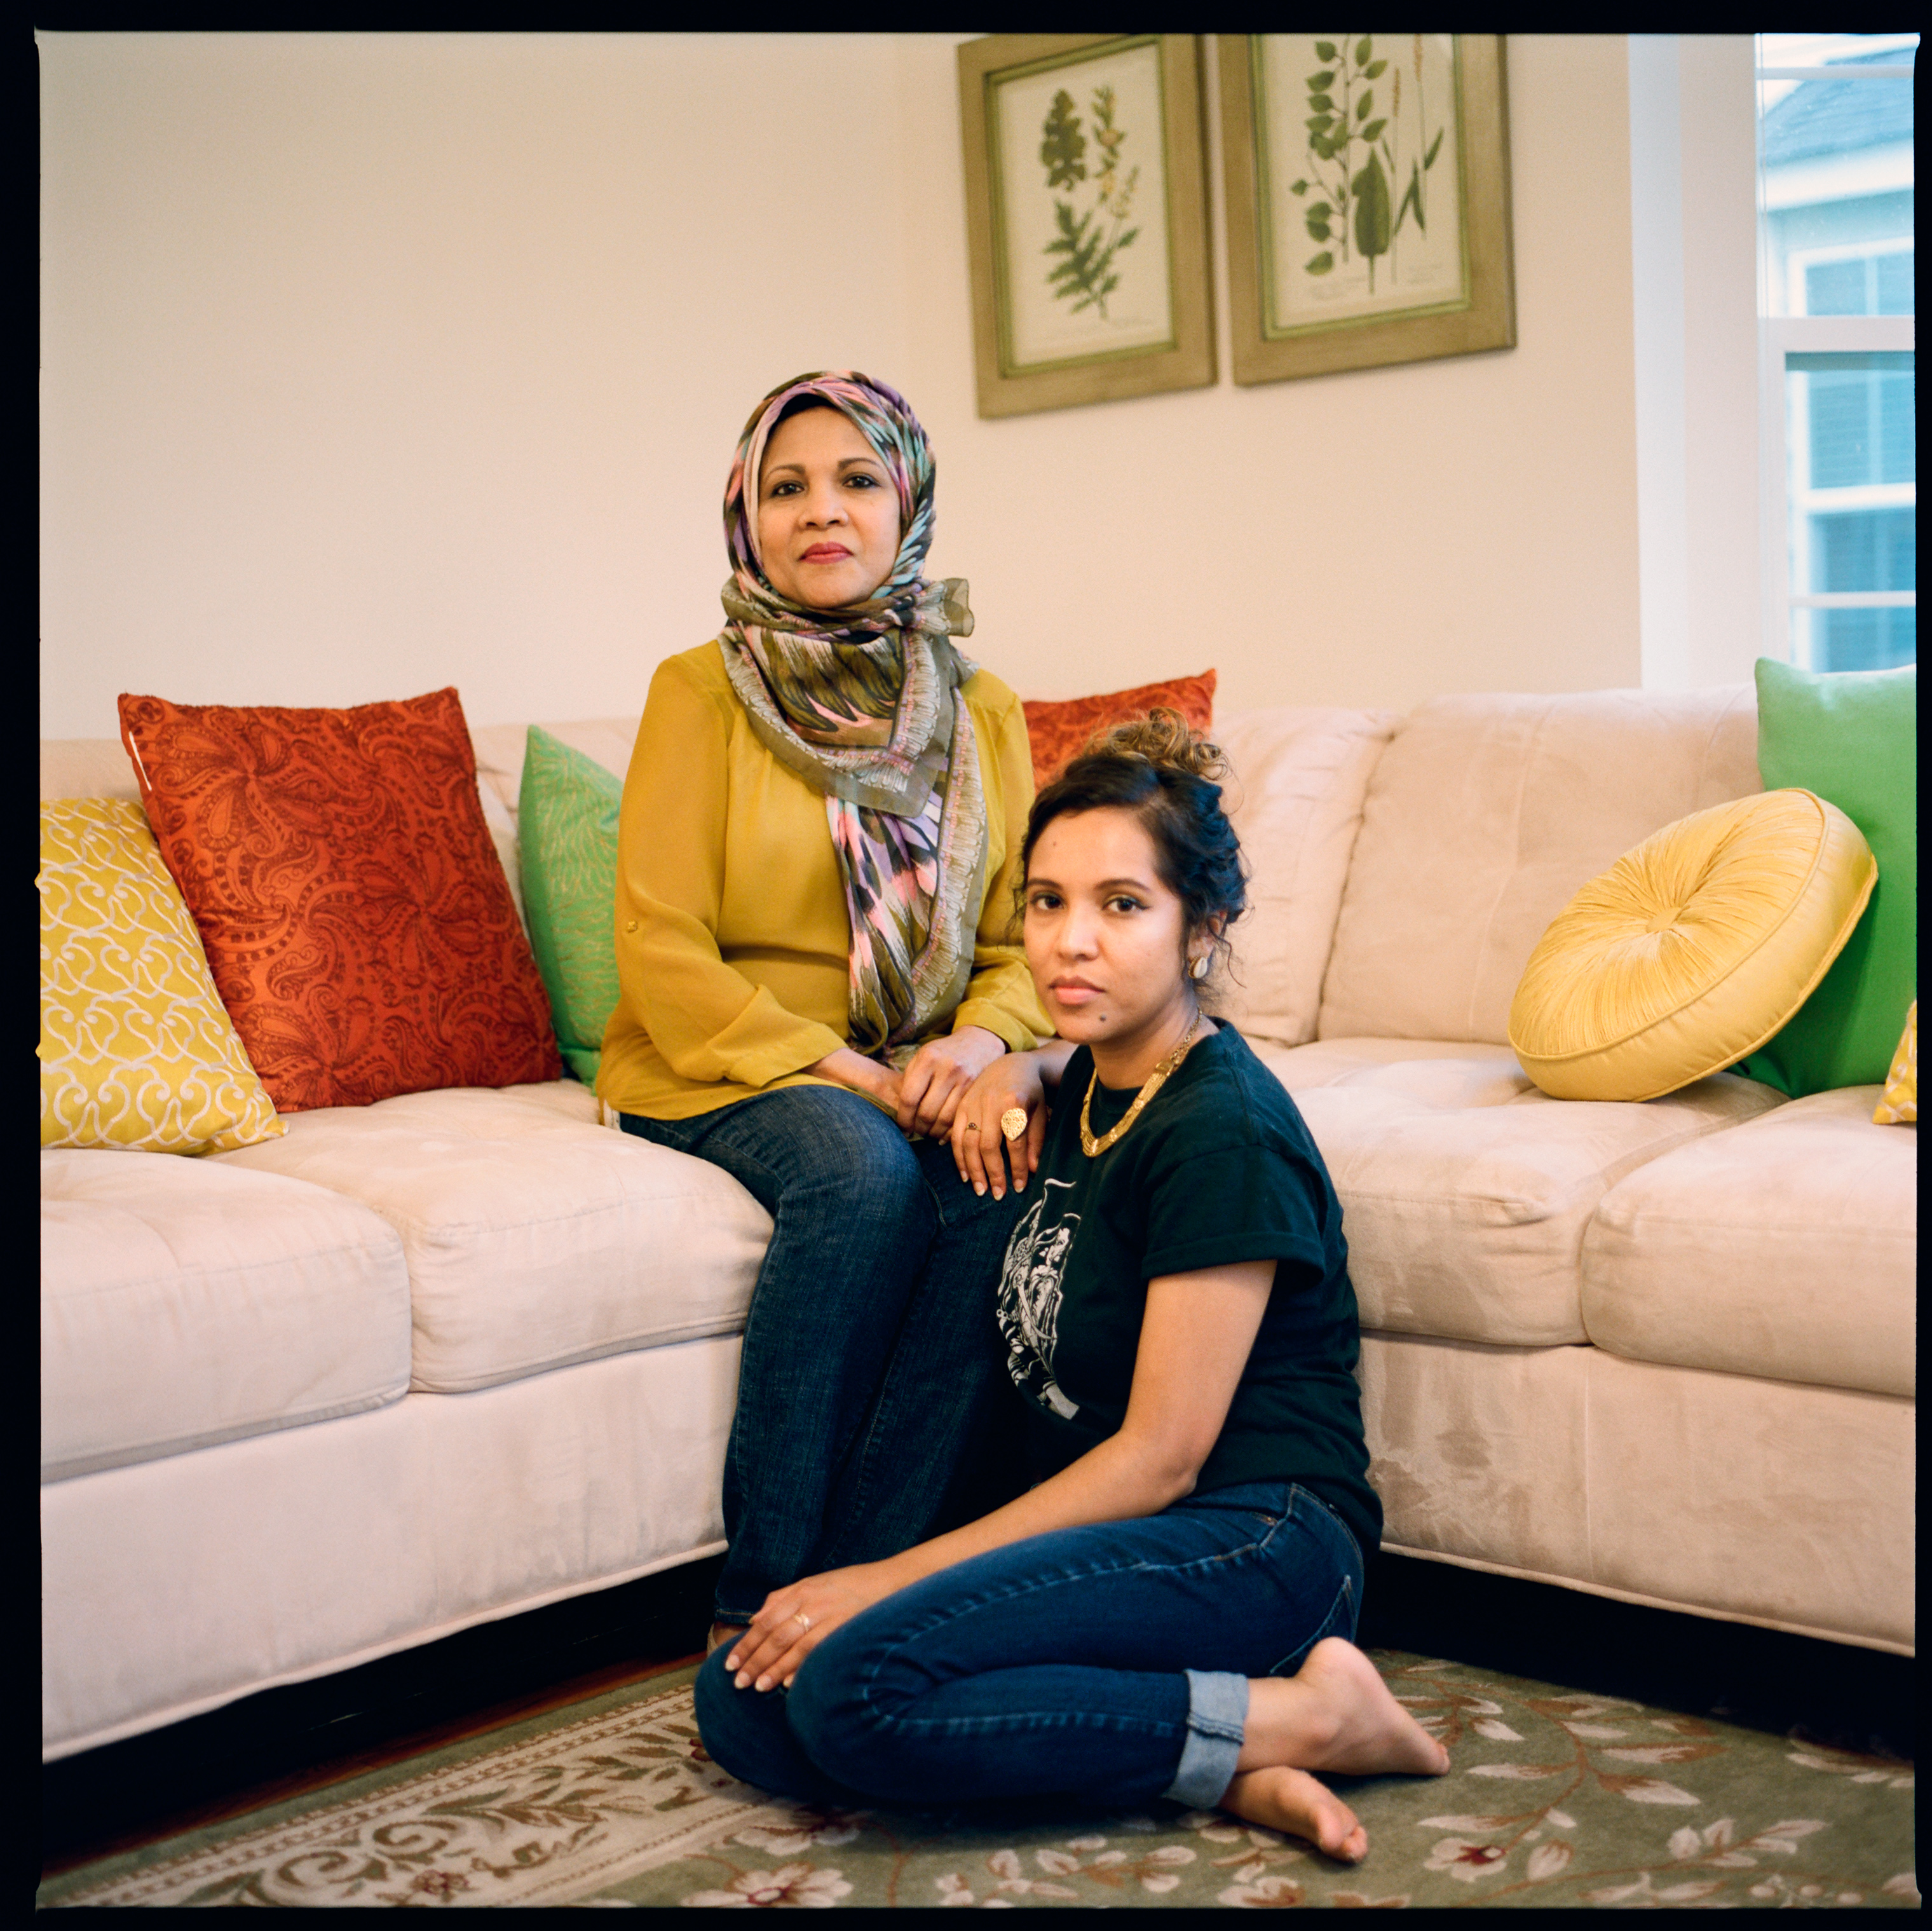 Isa shares her home with her mother Rubyna Isa, her father and her two siblings. (Miranda Barnes for TIME)